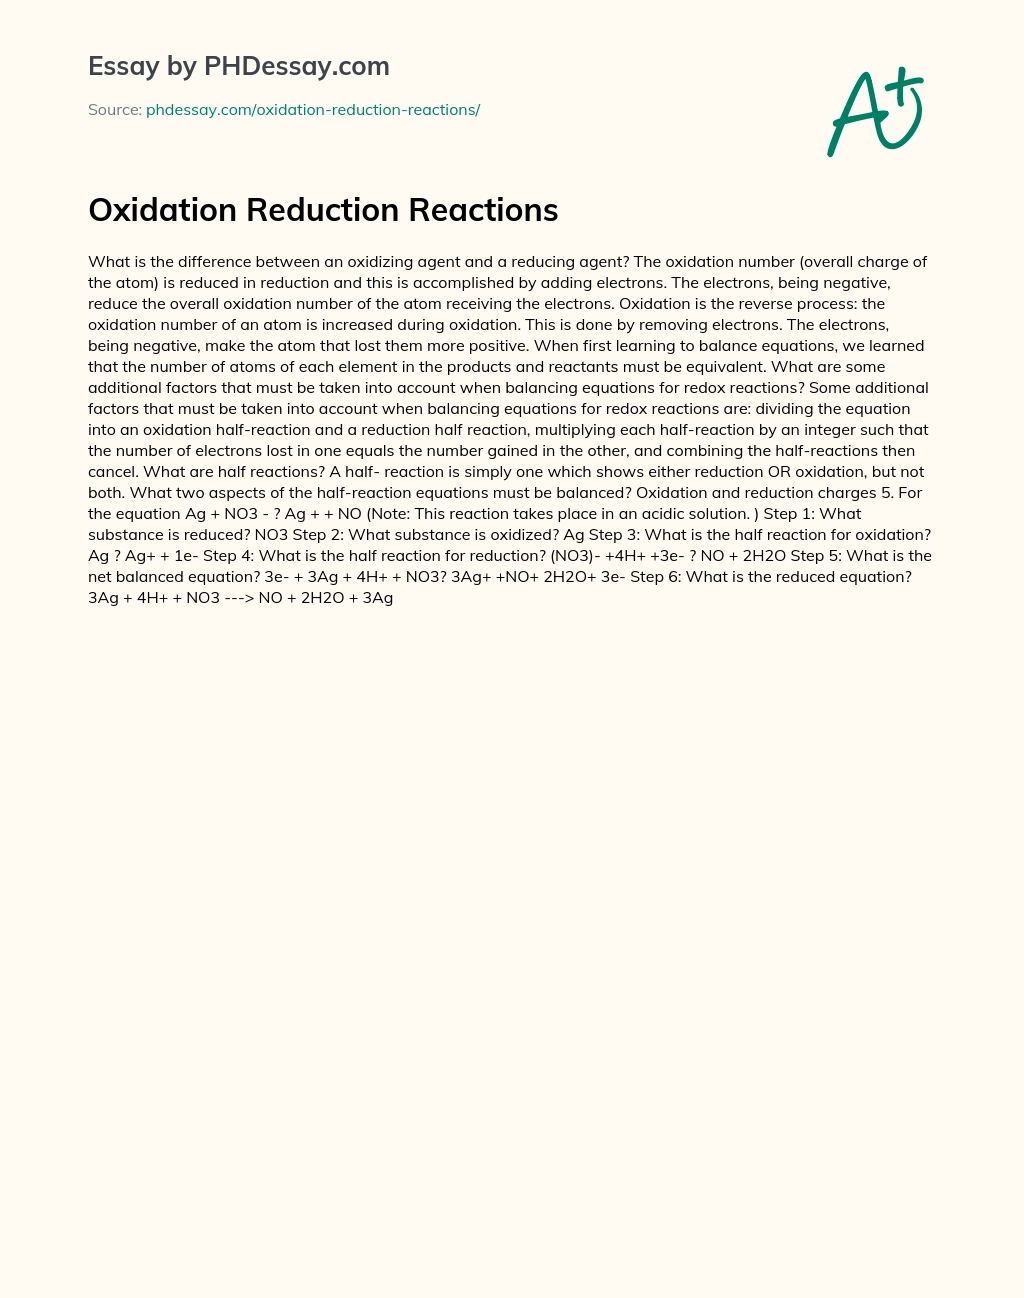 Oxidation Reduction Reactions essay